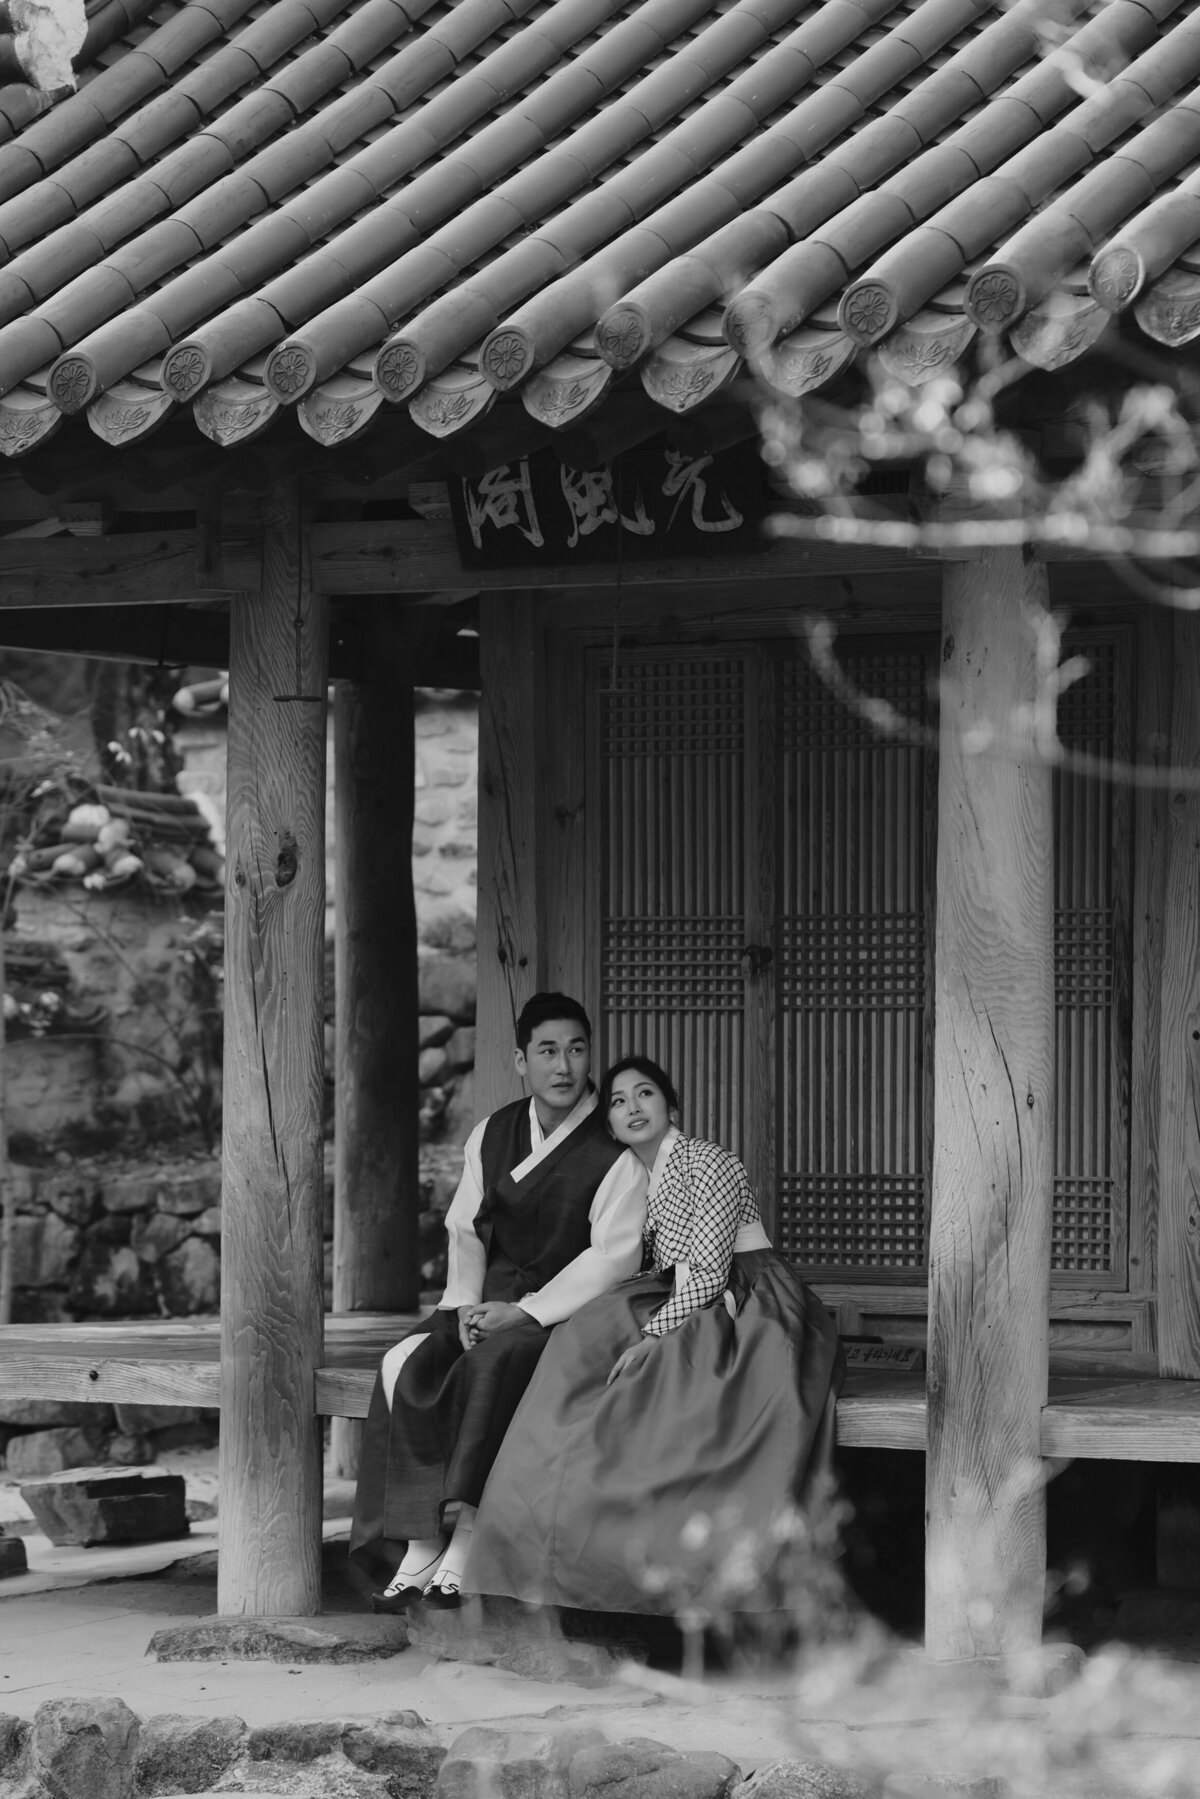 the couple looking at the view of soswaewon garden in damyang south korea